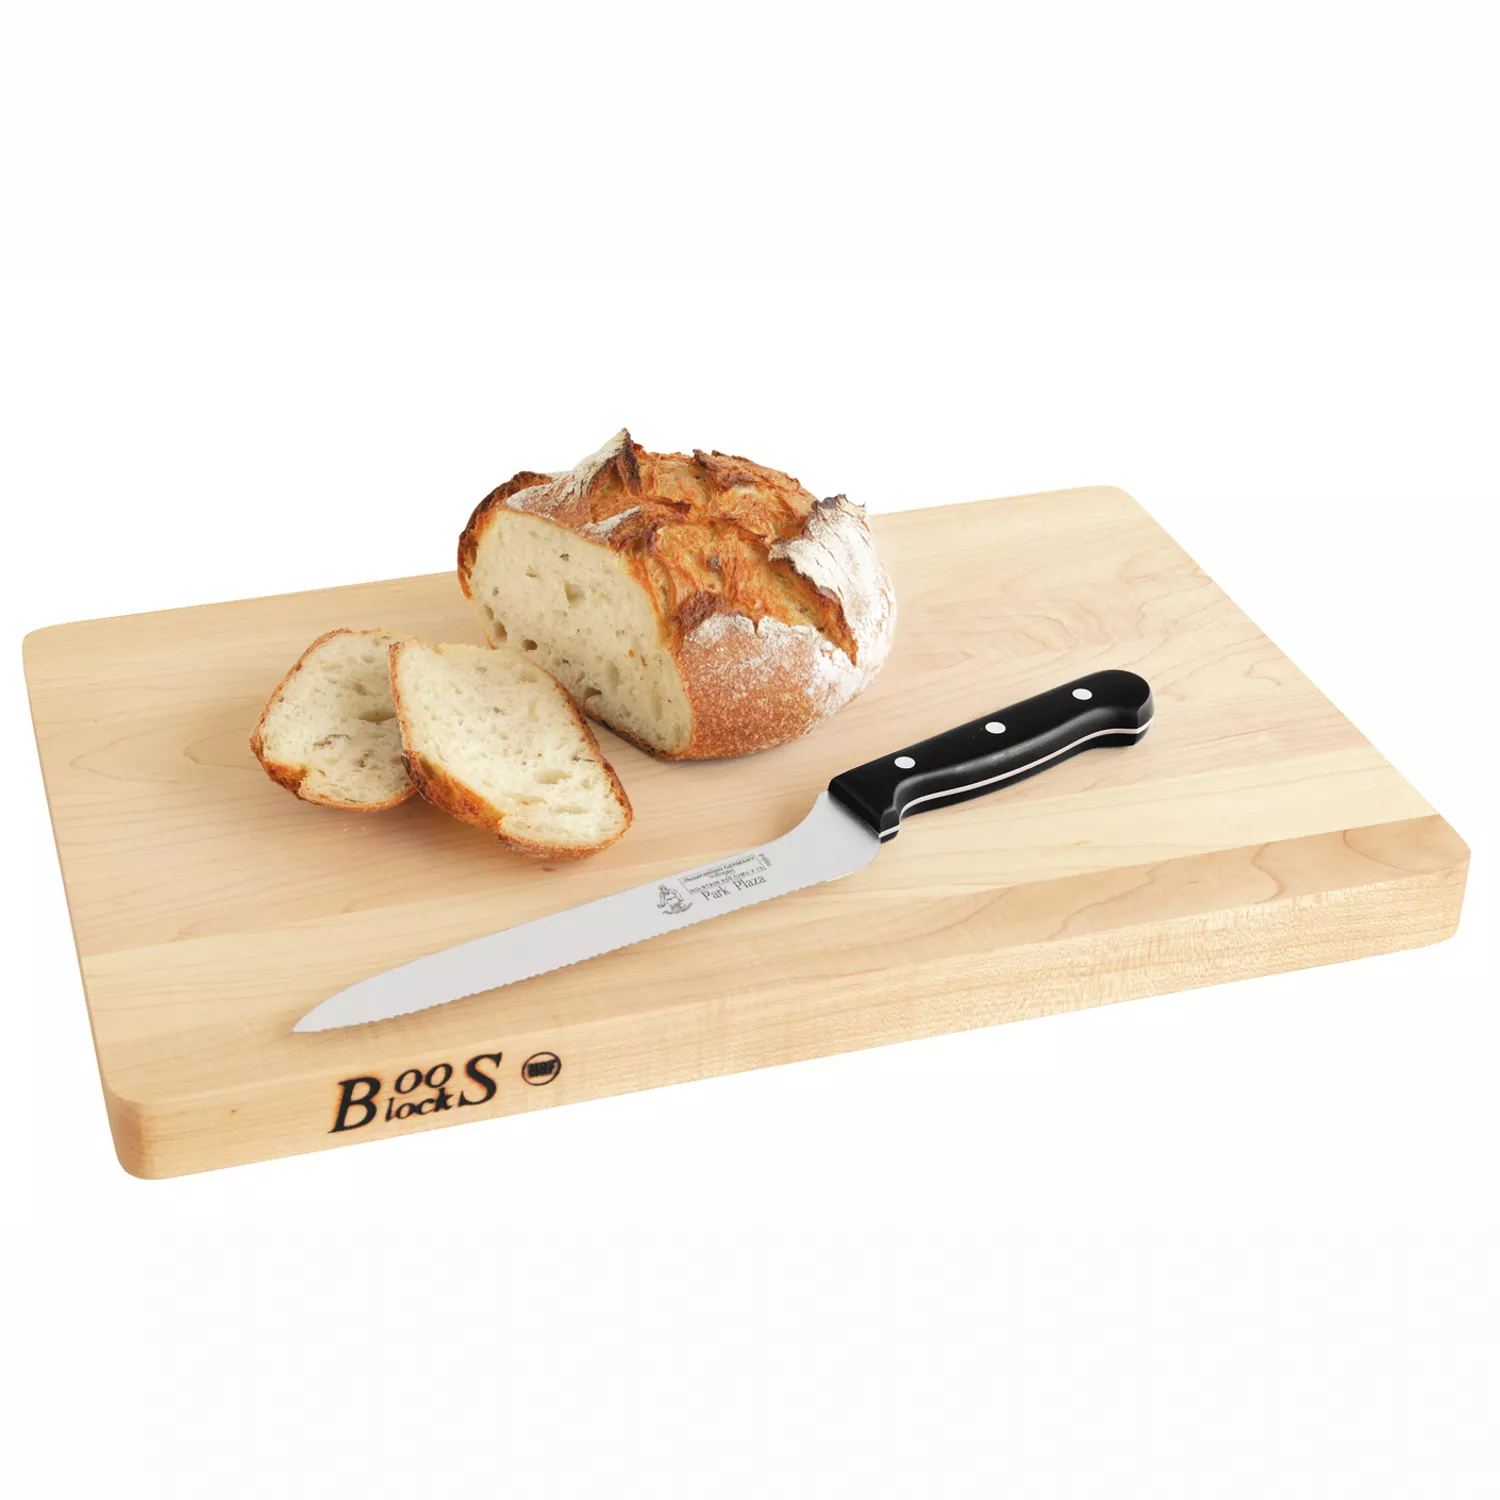 Maple Cutting Boards 1-1/2 Thick (R-Board Series)